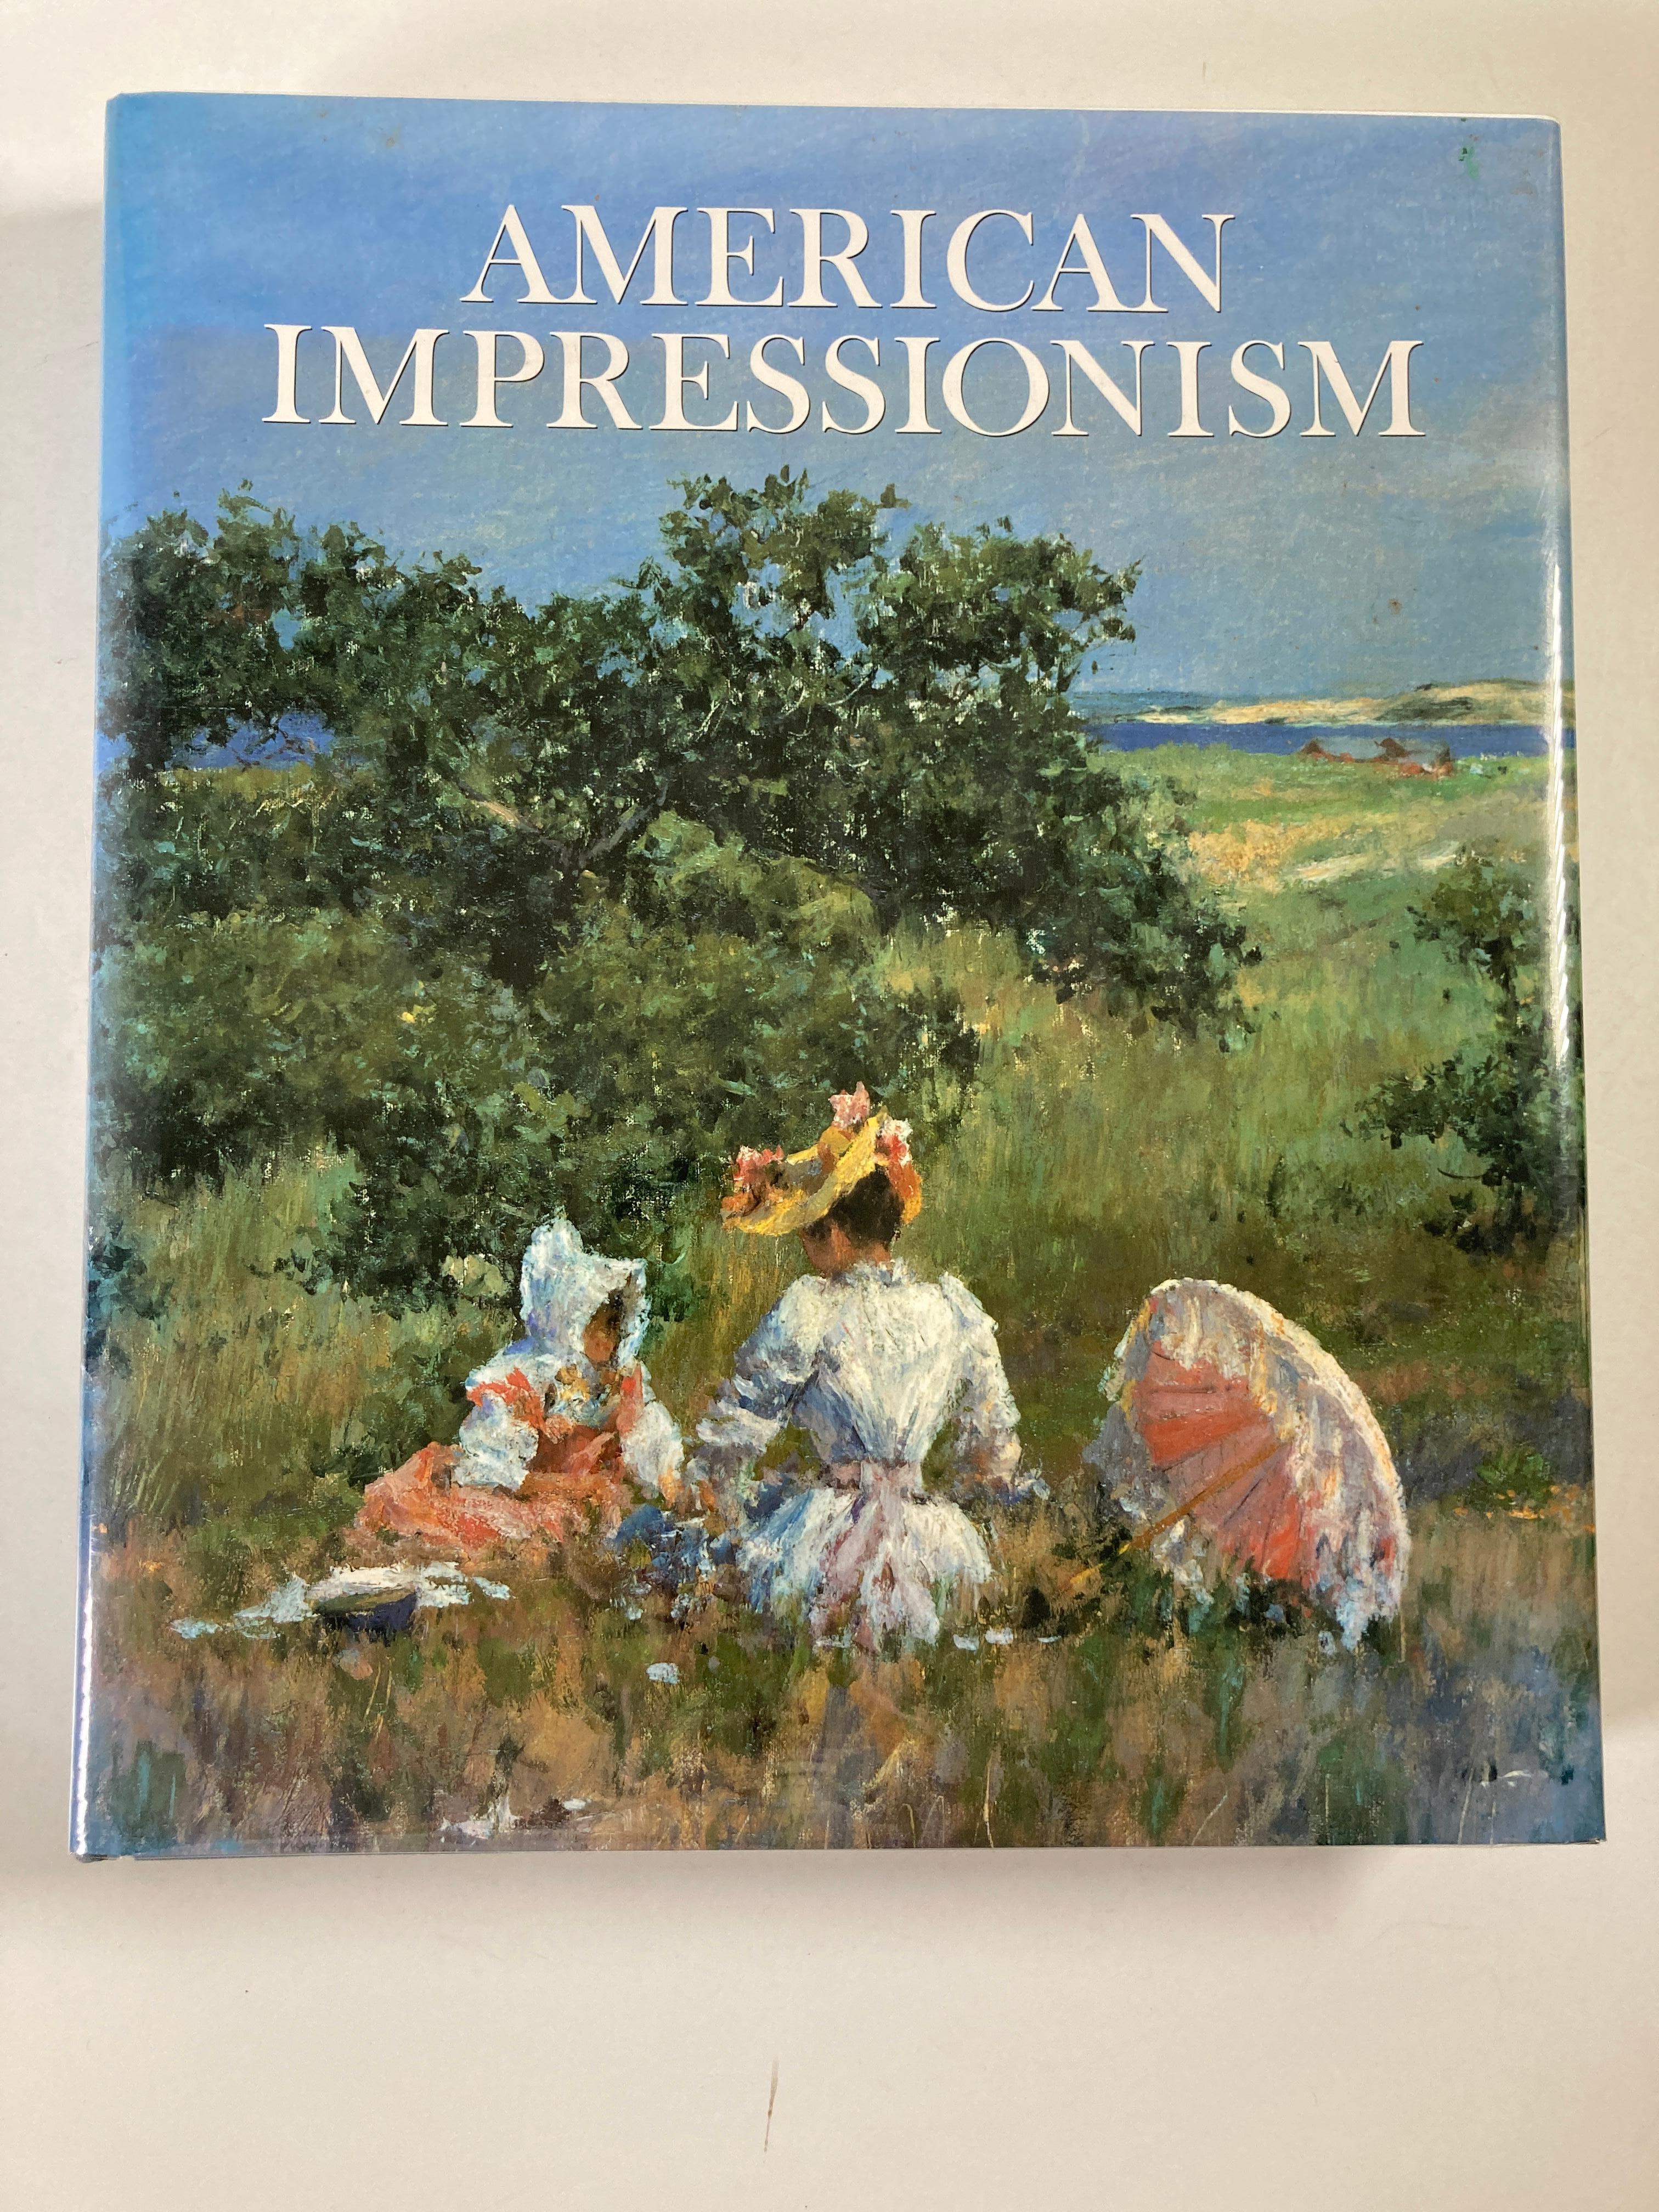 American Impressionism Book by William H. Gerdts Hardcover Book.
Lavishly illustrated with more than 400 paintings by 125 different artists, this volume contains documentary photographs of the artists and quotations from their private letters and